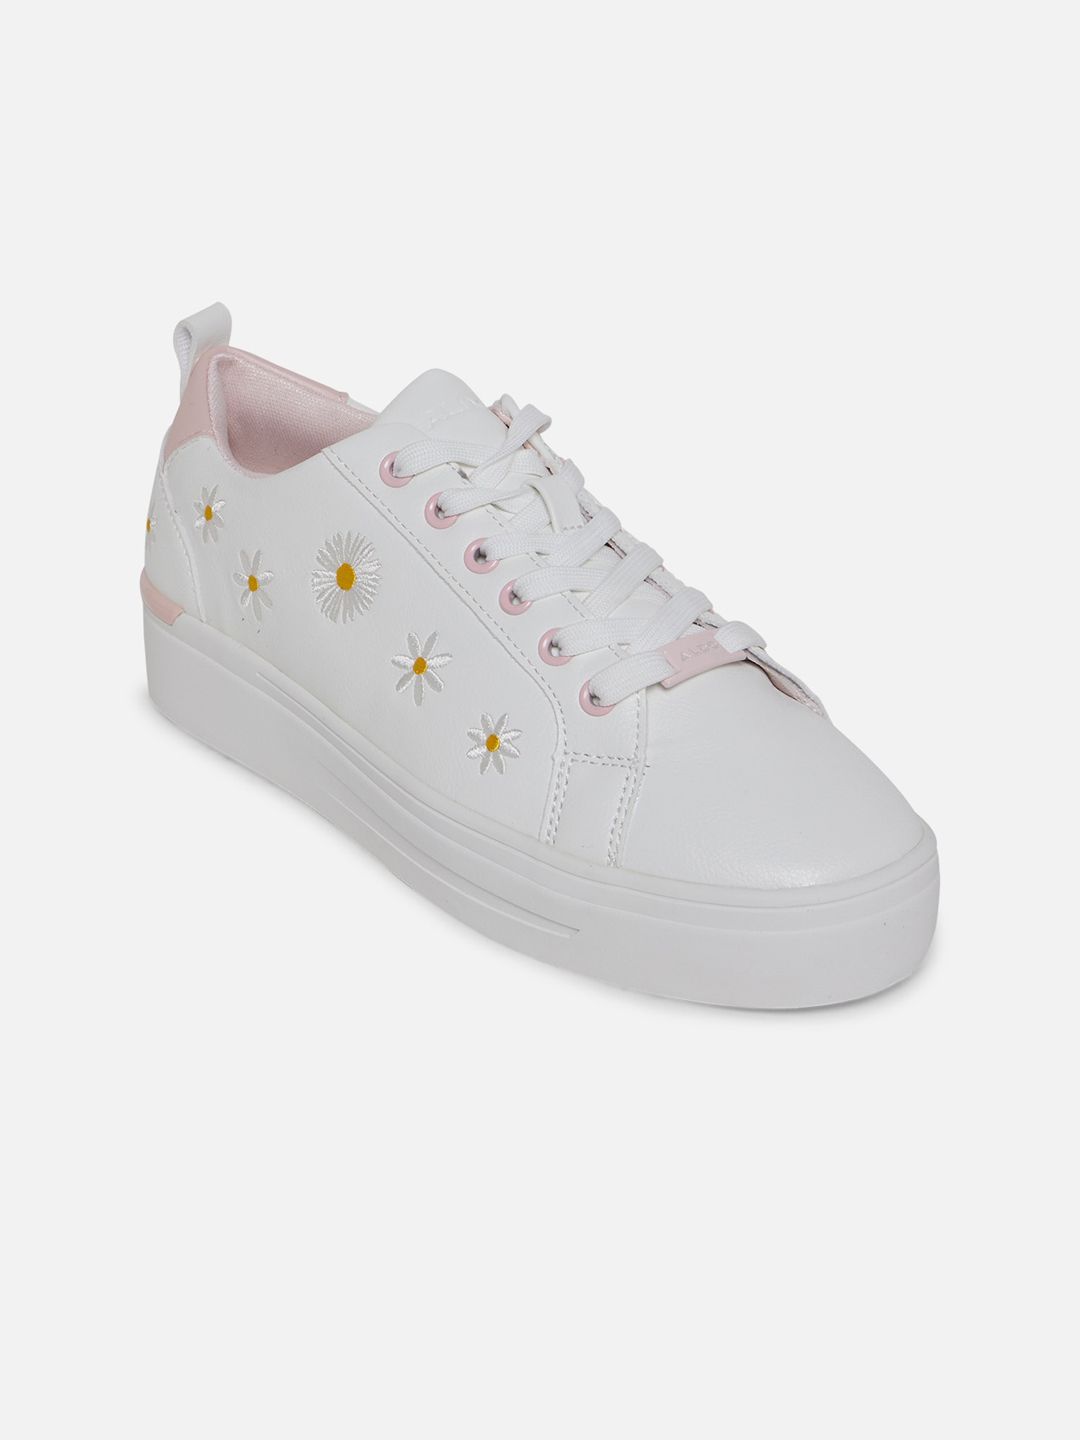 ALDO Women Pink & White Embroidered Sneakers Price in India